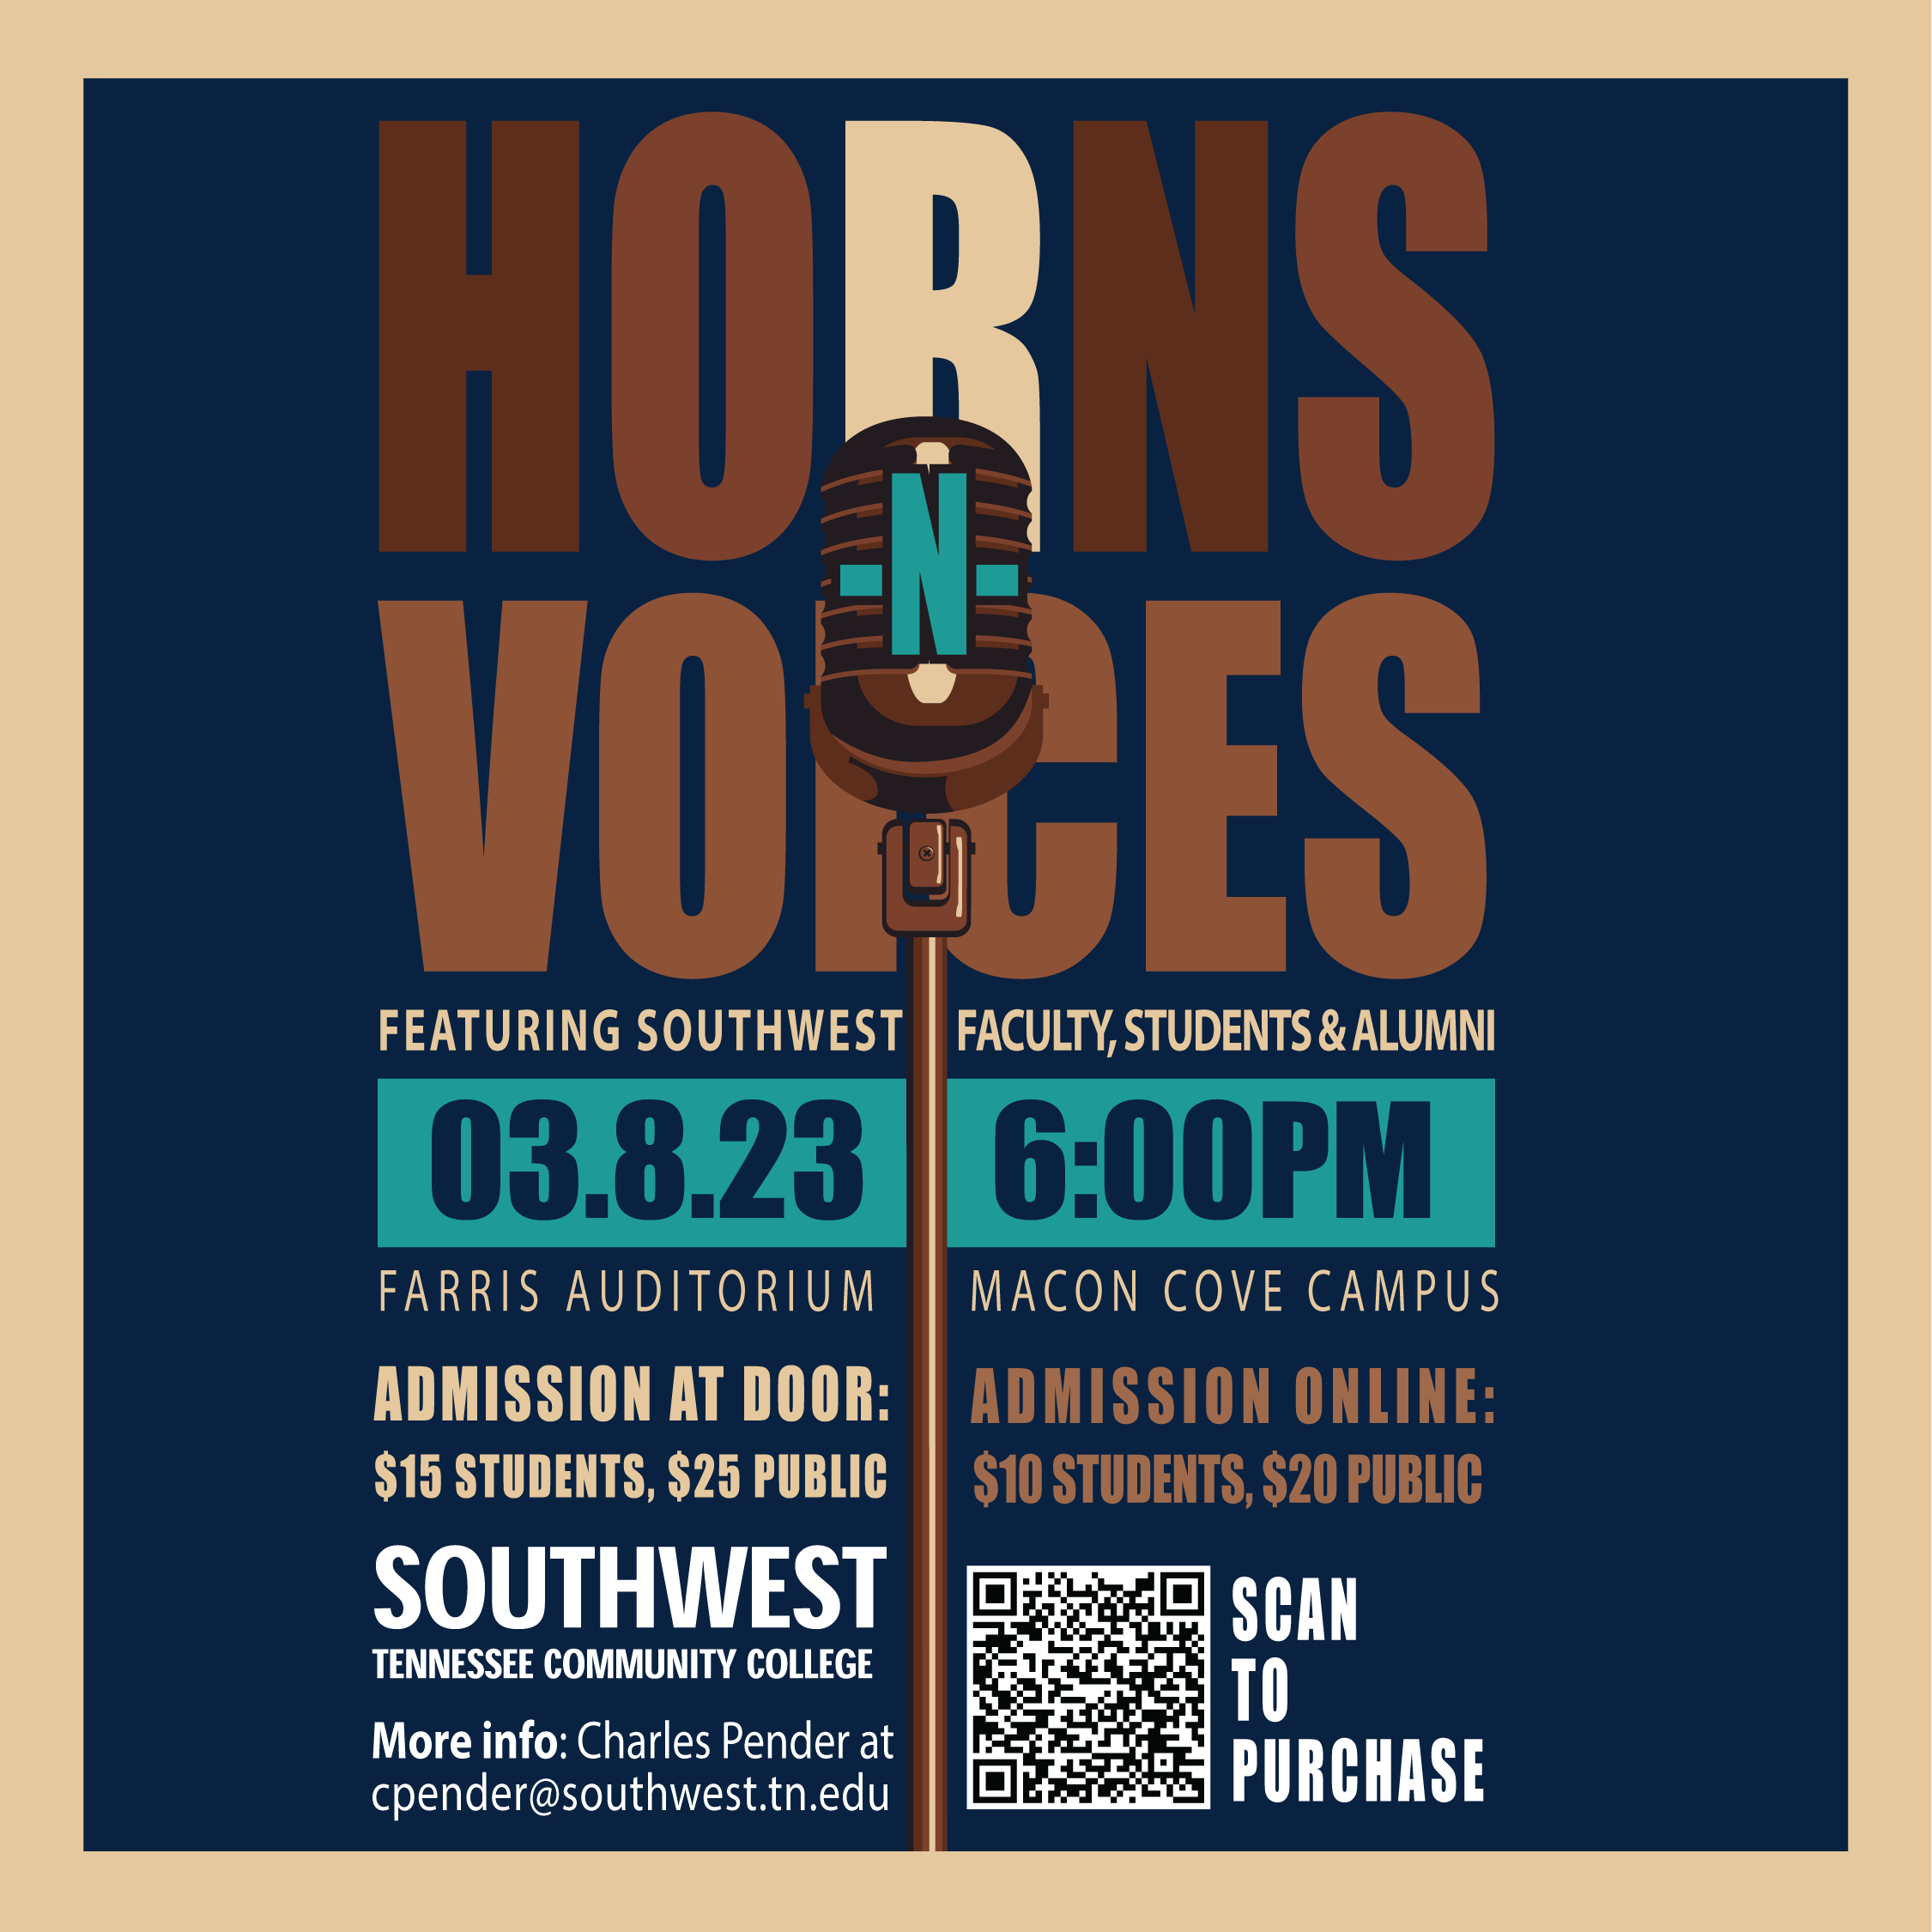 Southwest to host Horns & Voices concert celebrating Memphis’ musical heritage March 8